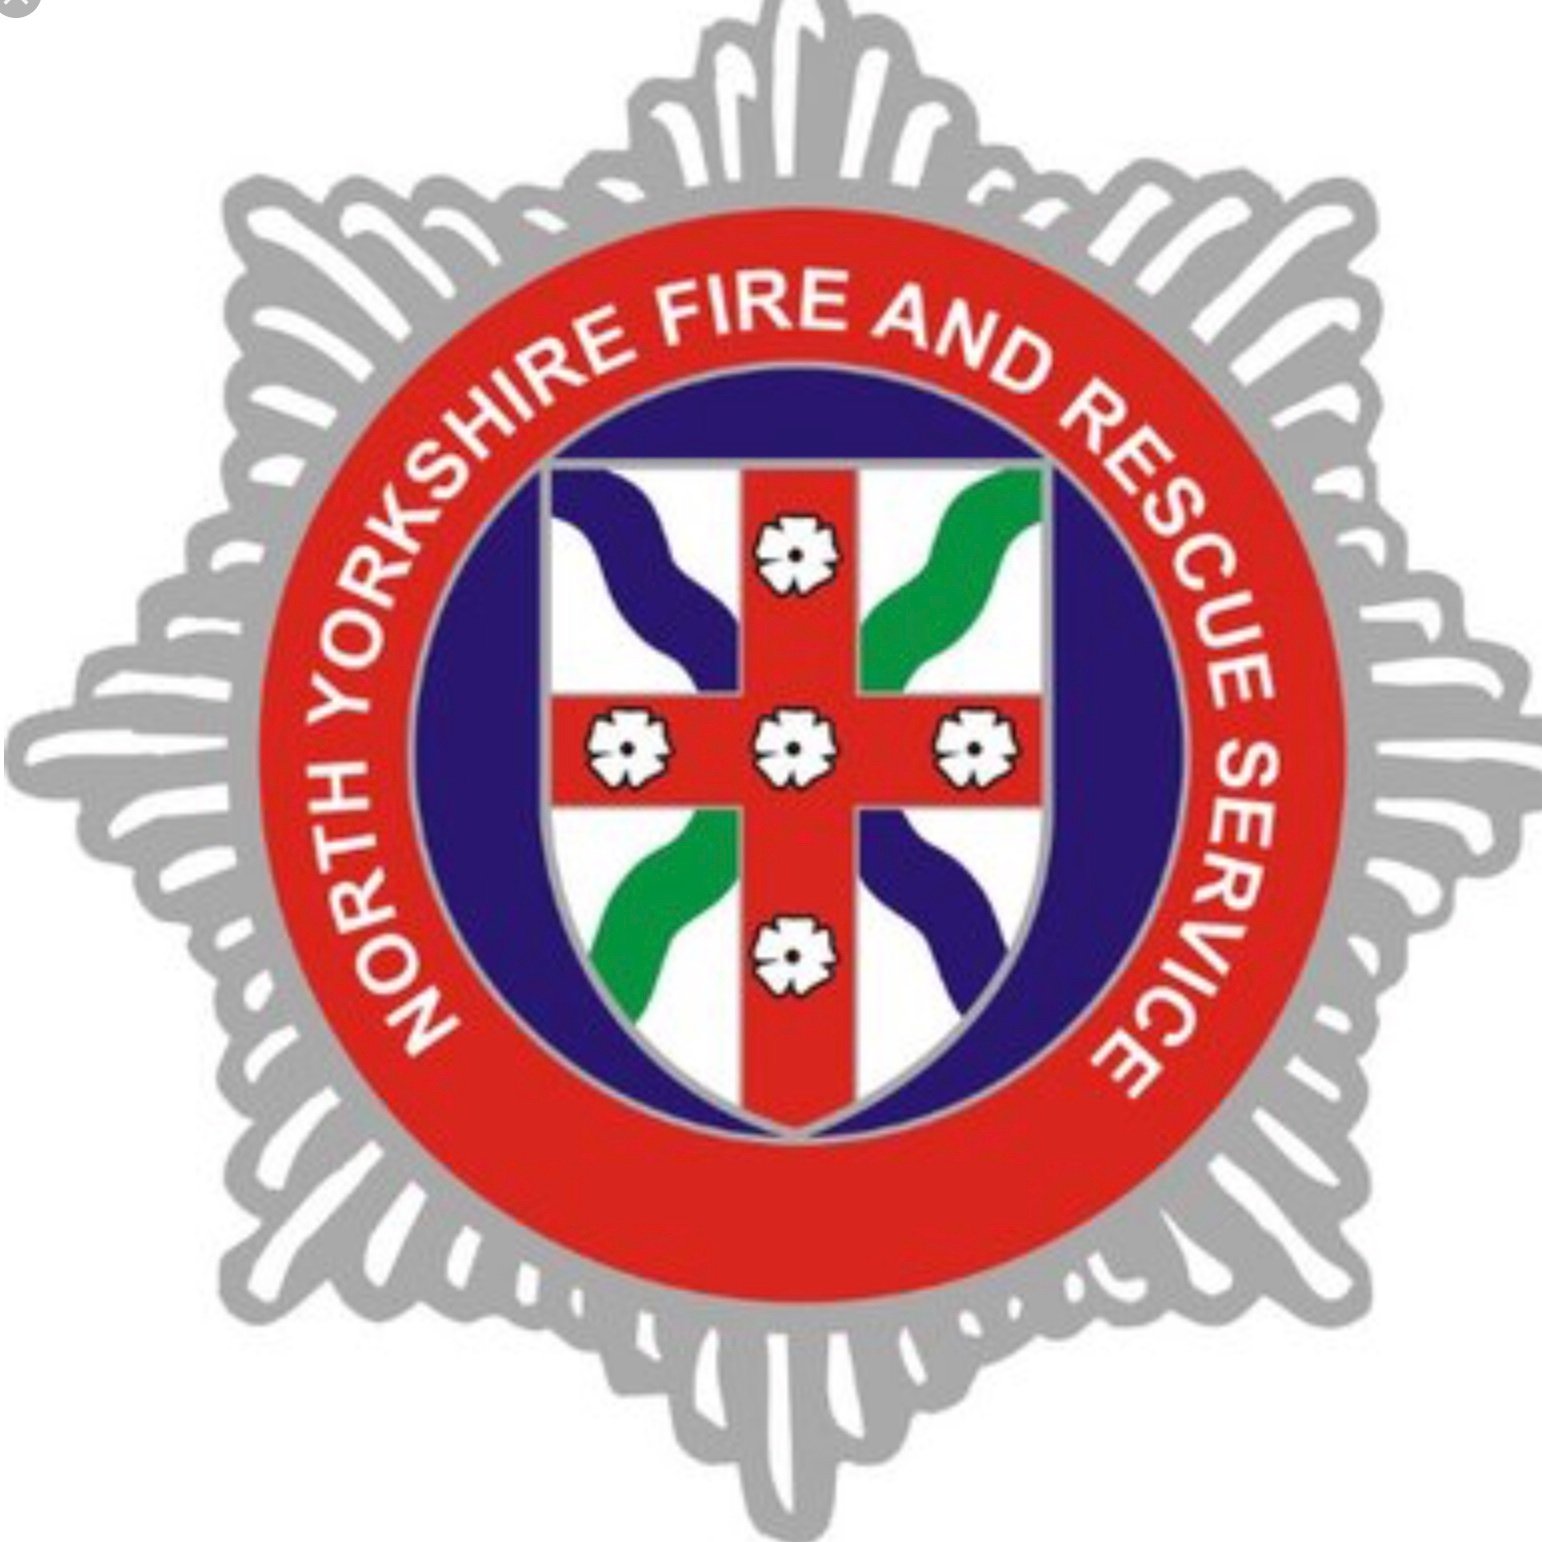 Sherburn Fire Station in North Yorkshire.

Retained on-call fire station cover Sherburn and surrounding areas.

Passionate about serving the community